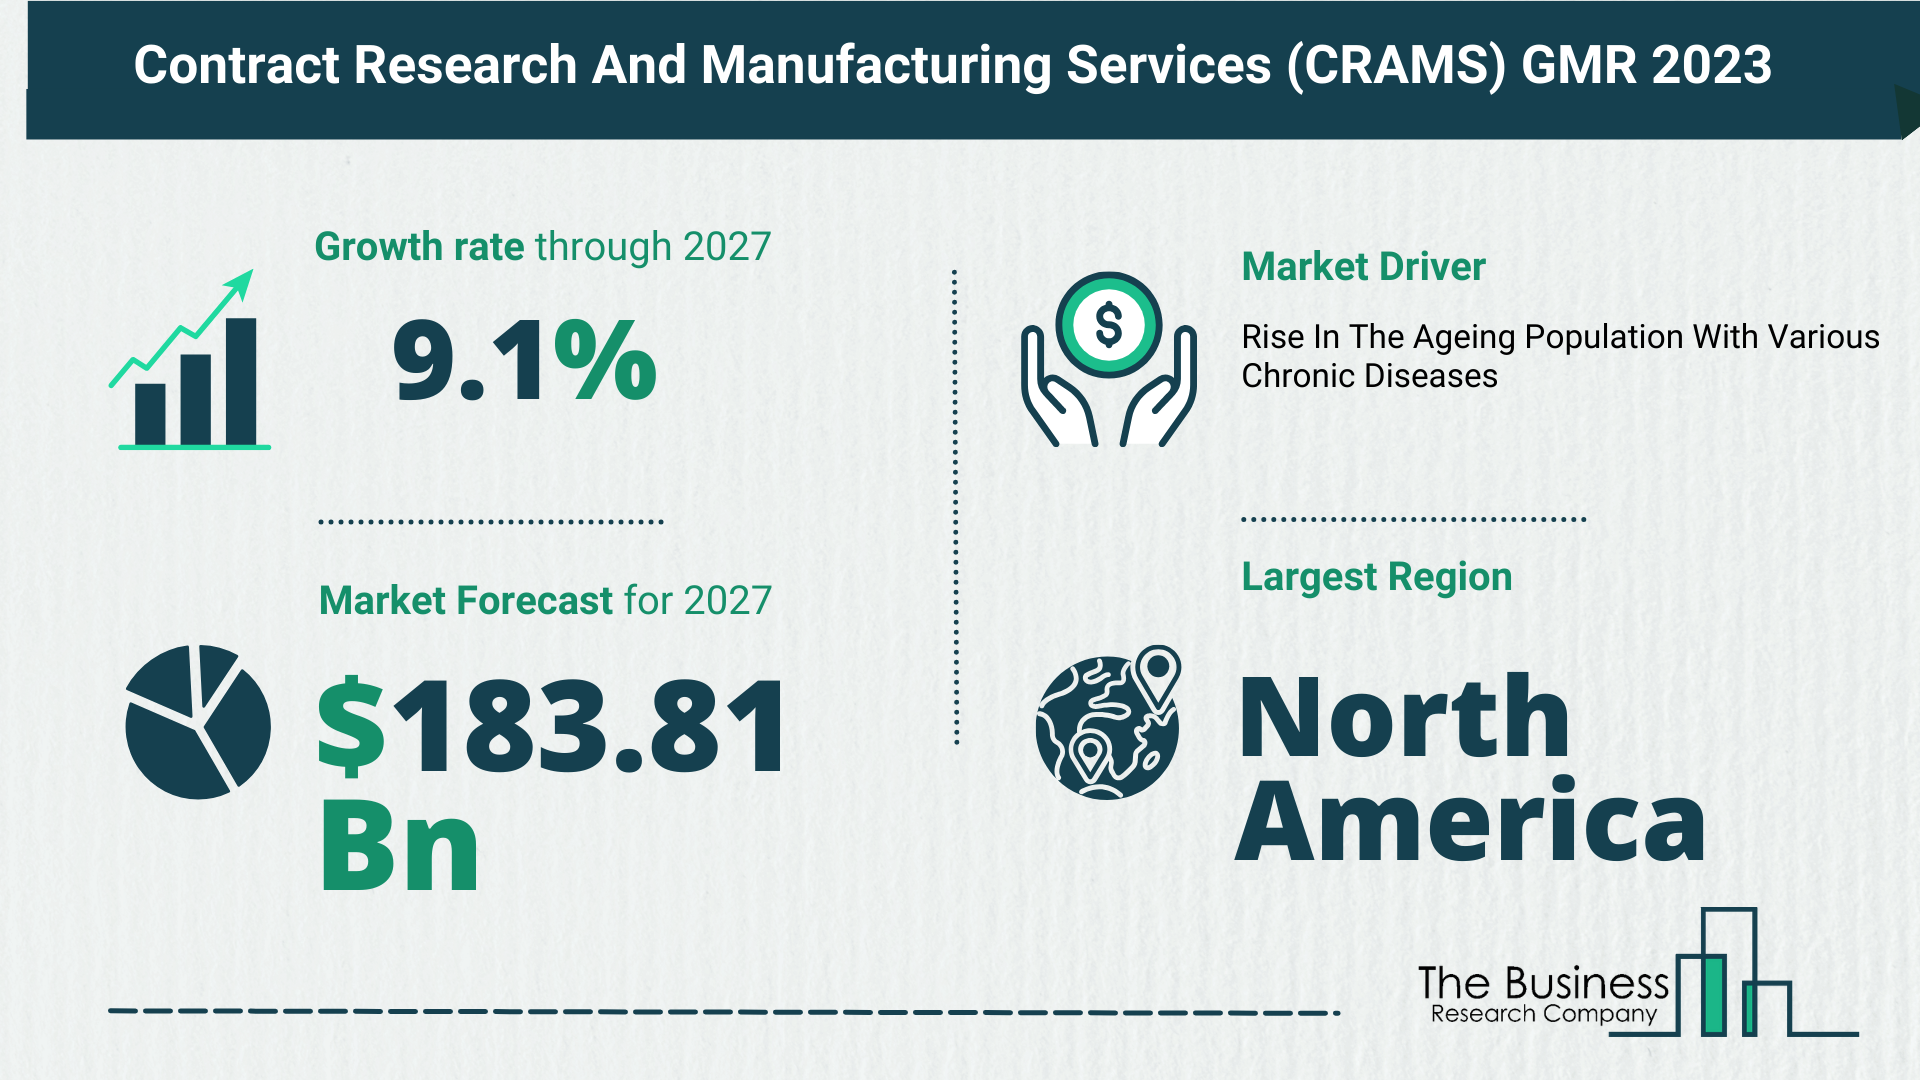 Global Contract Research And Manufacturing Services (CRAMS) Market